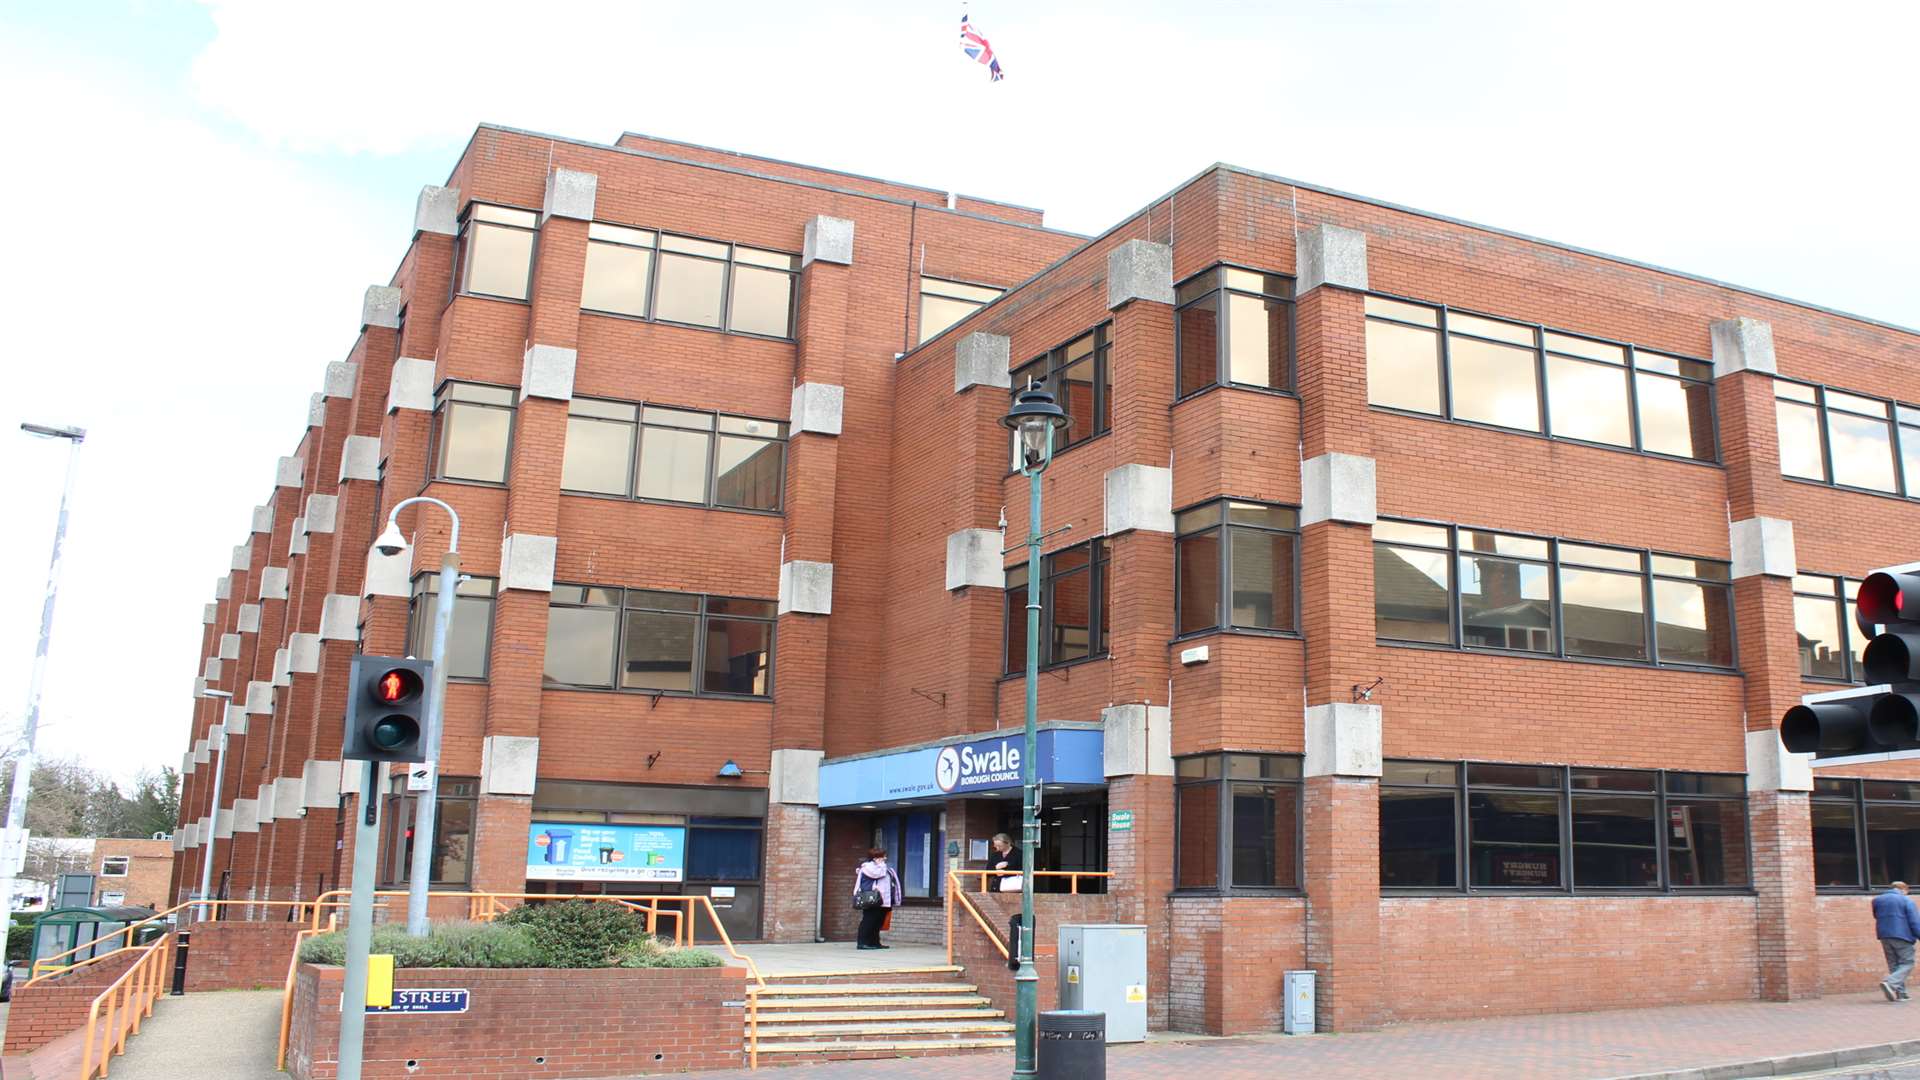 Swale House, Swale council's headquarters in East Street, Sittingbourne